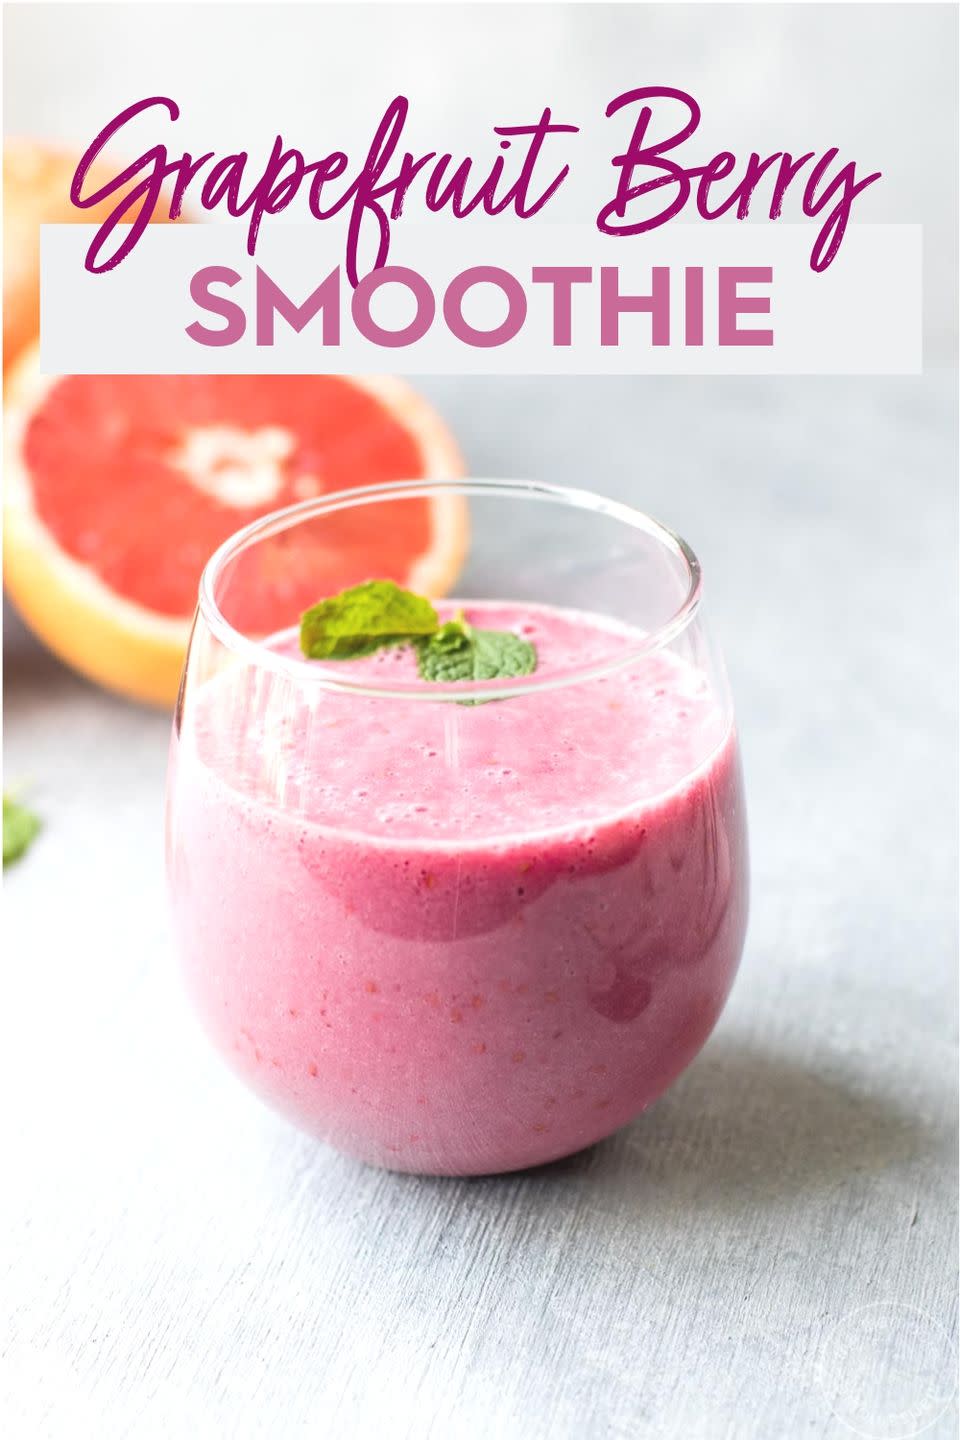 Grapefruit Smoothie with Berries and Mint